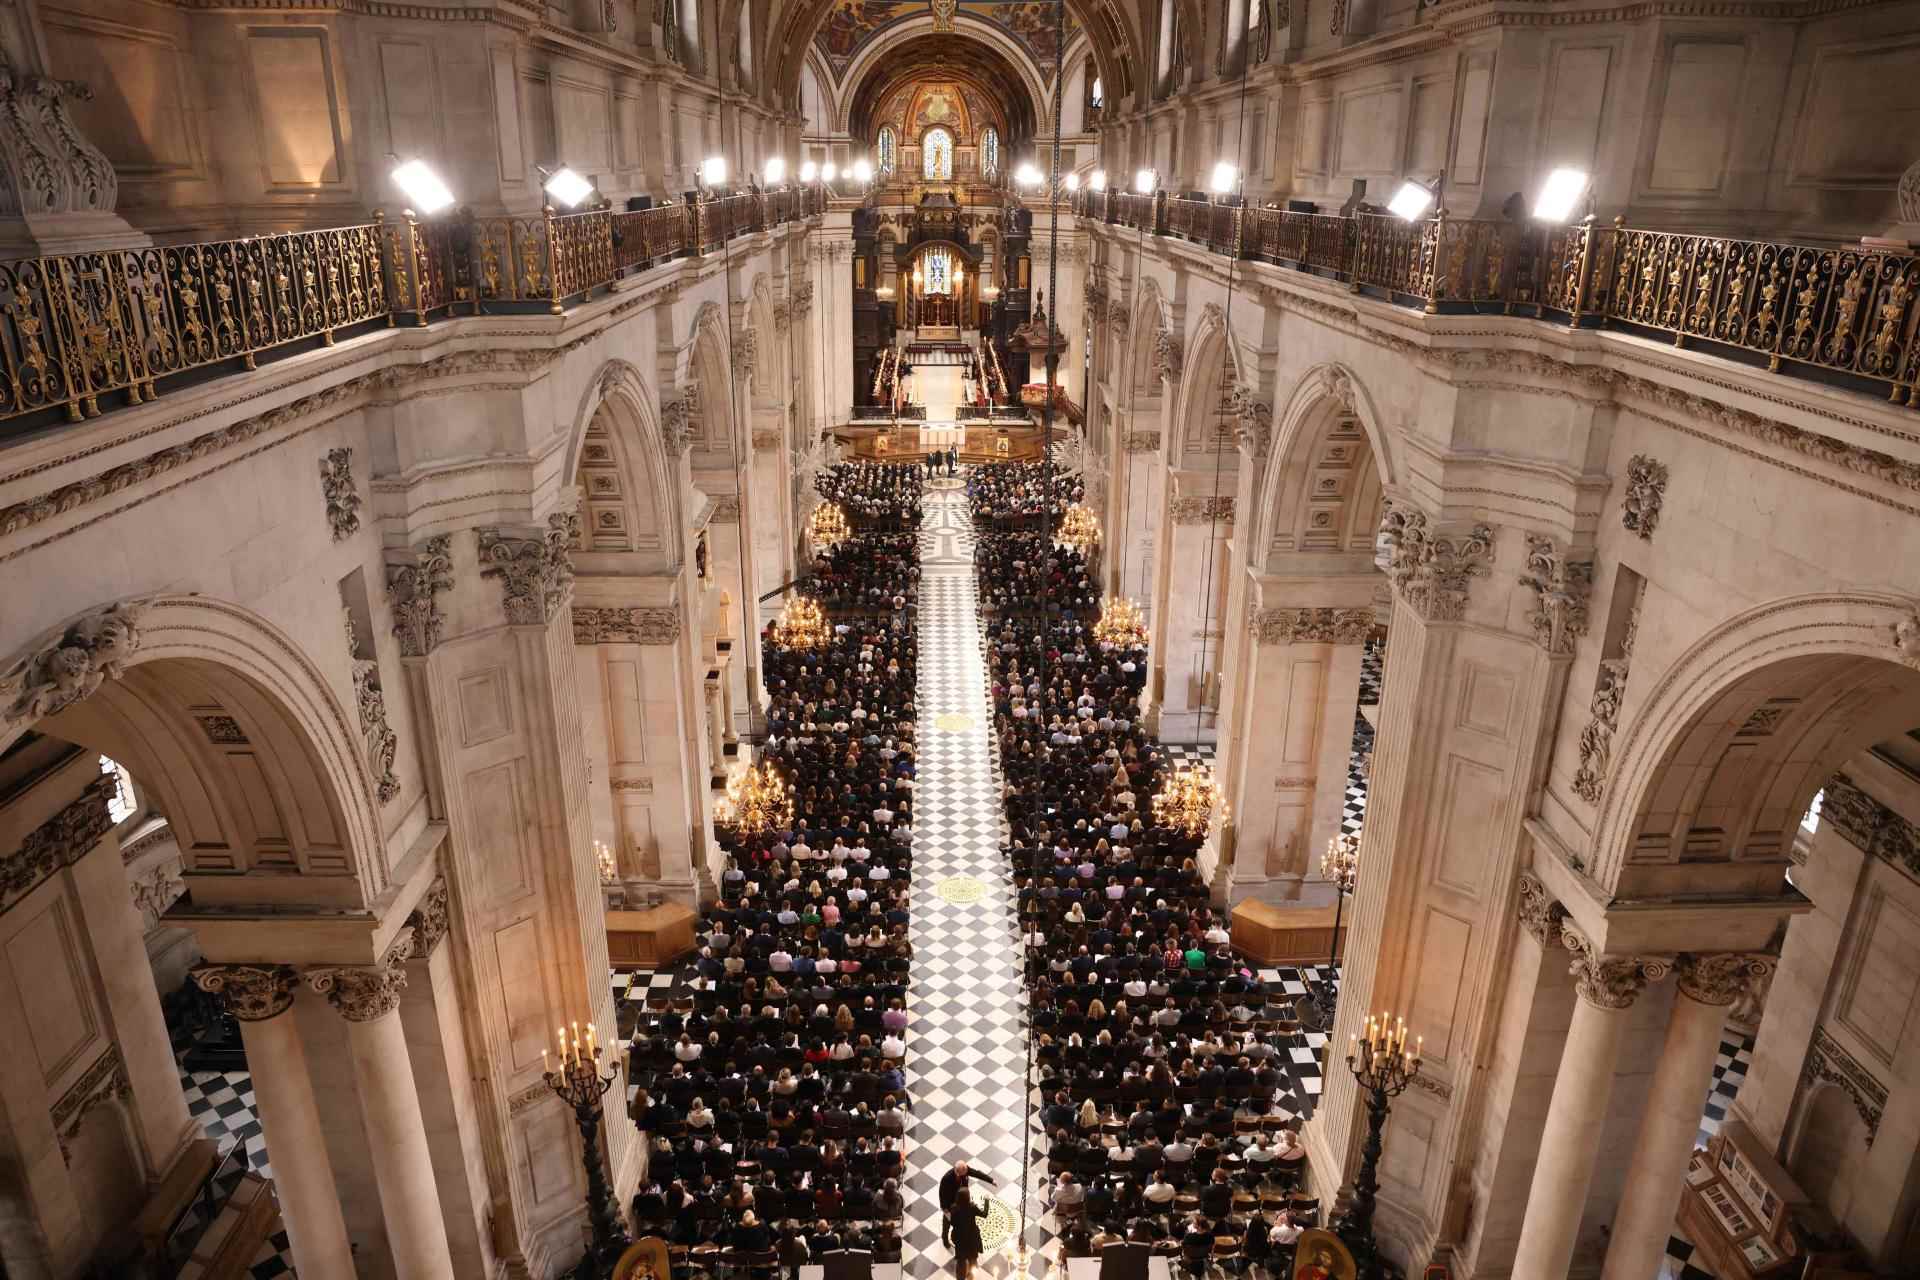 The memorial mass in honor of Queen Elizabeth II at St. Paul's Cathedral in London, September 9, 2022.